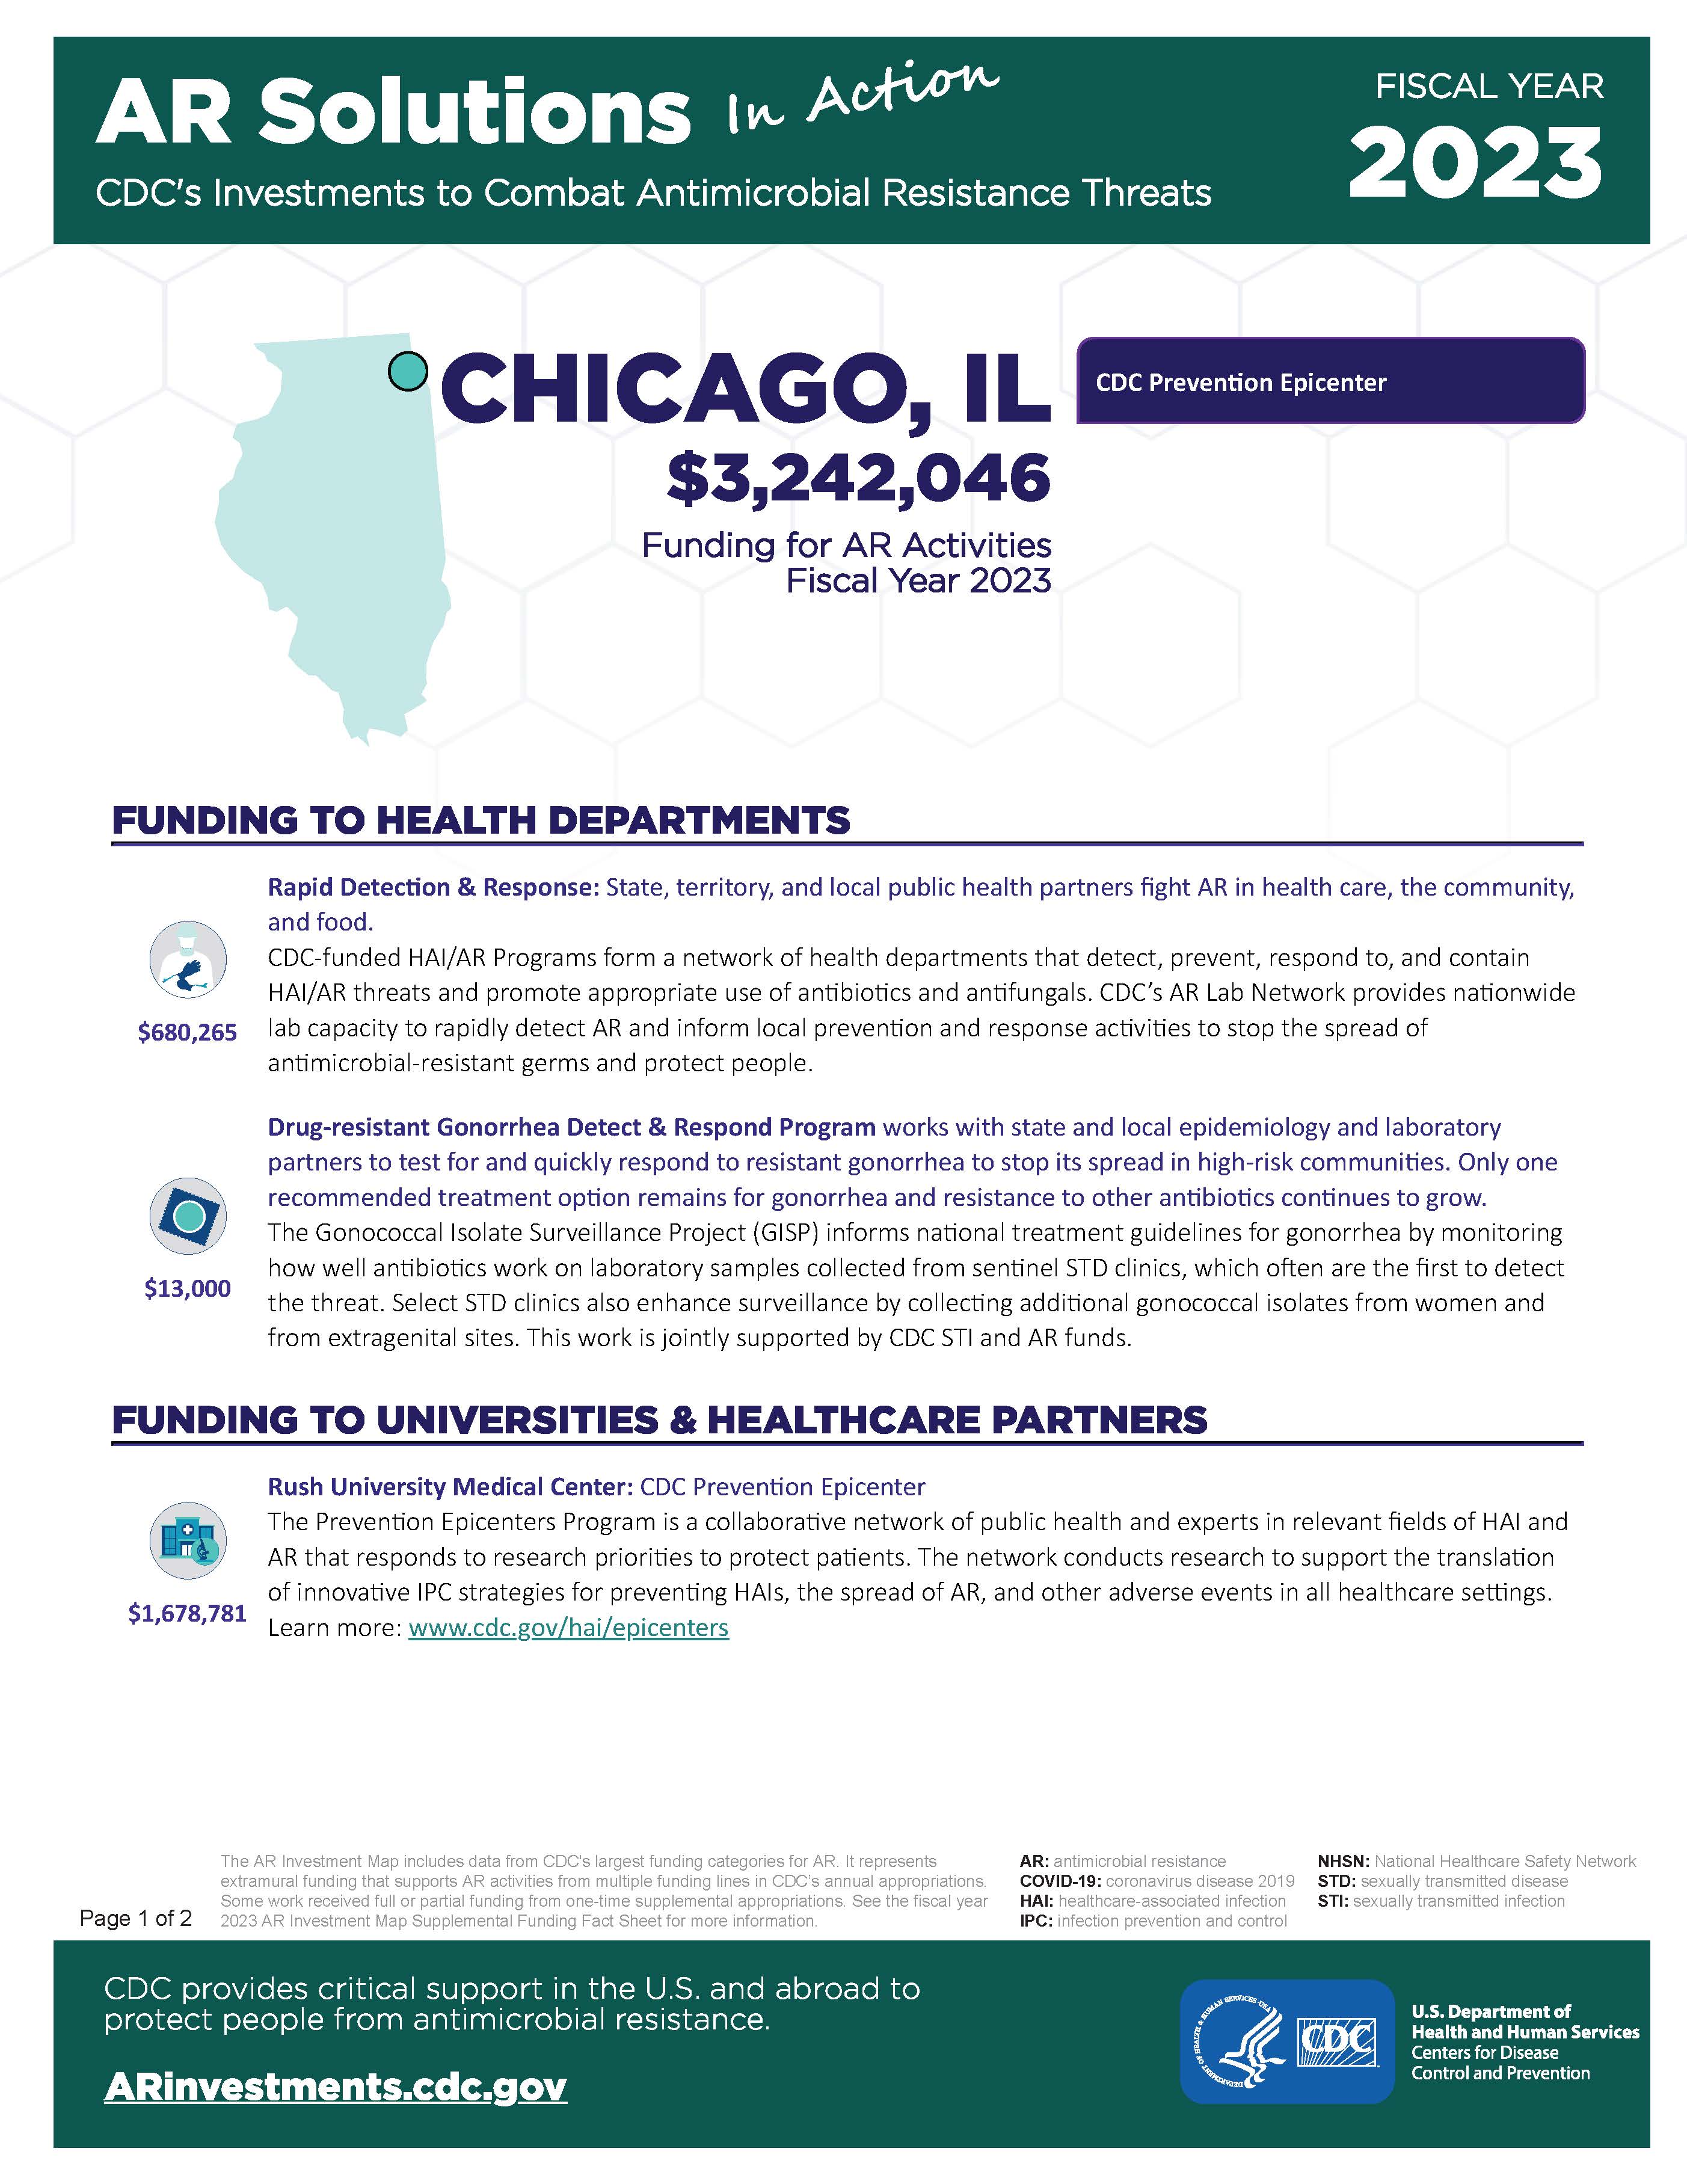 View Factsheet for Chicago, IL